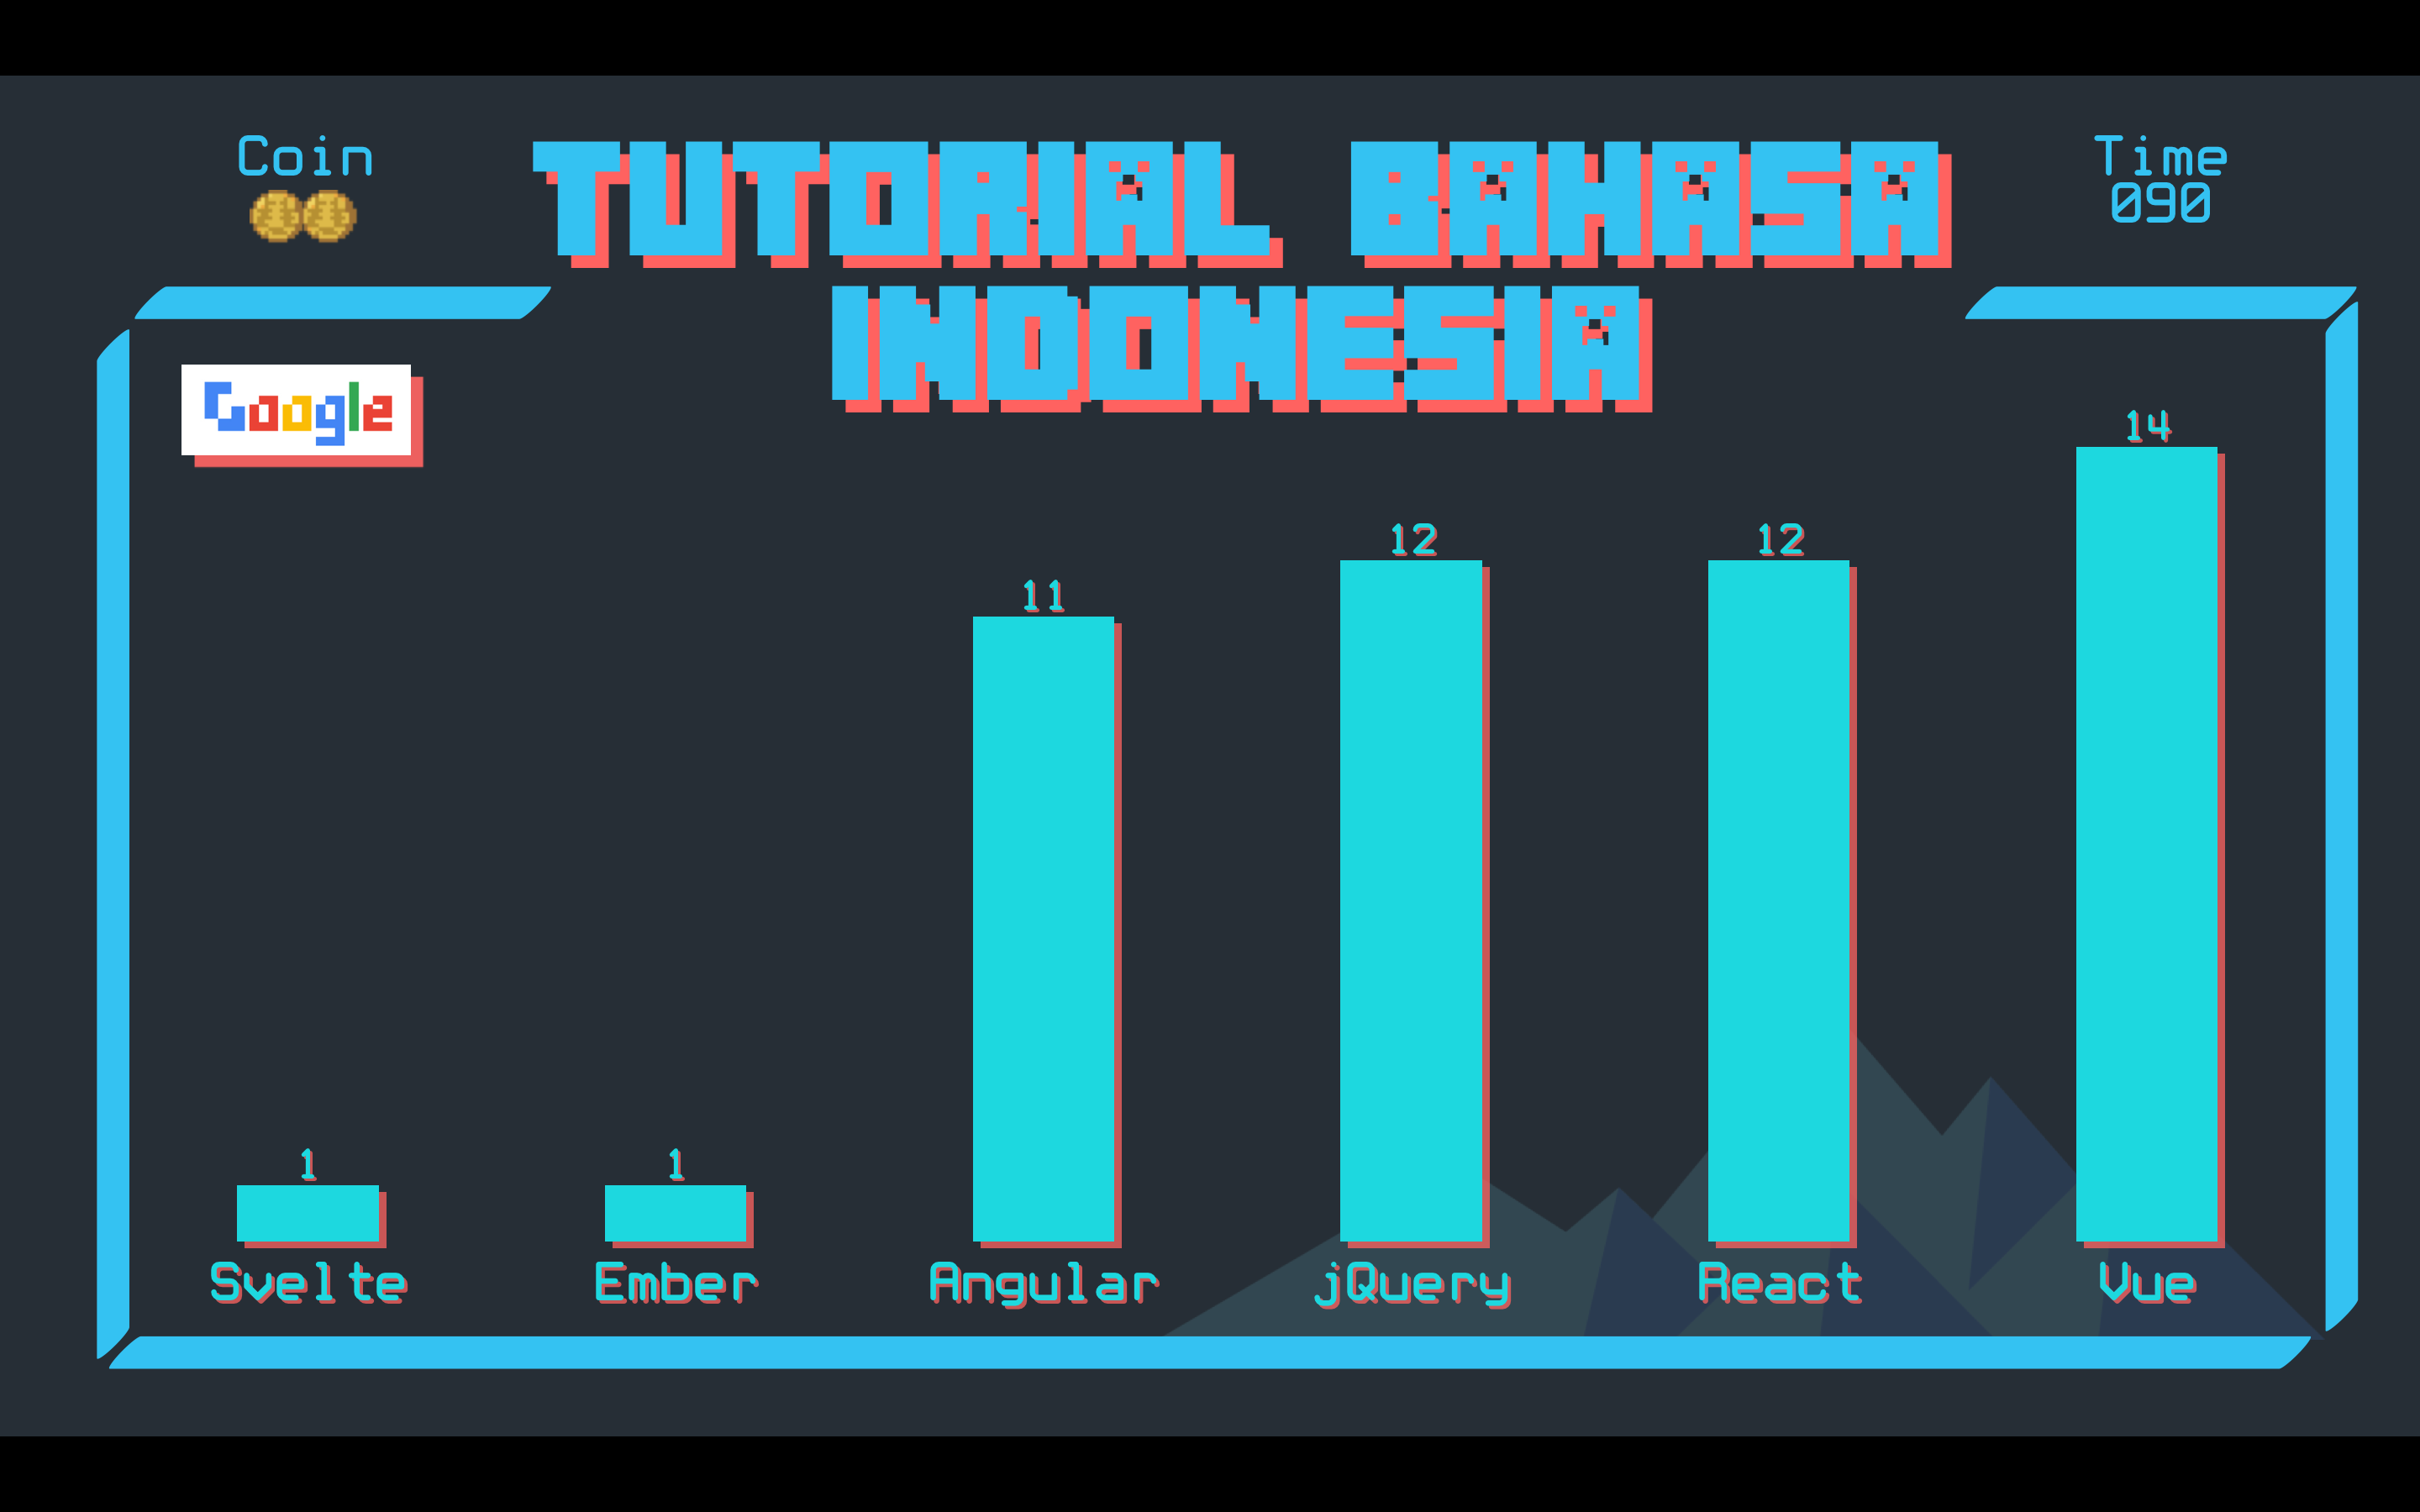 The number of tutorials available in Bahasa Indonesia for each framework/library